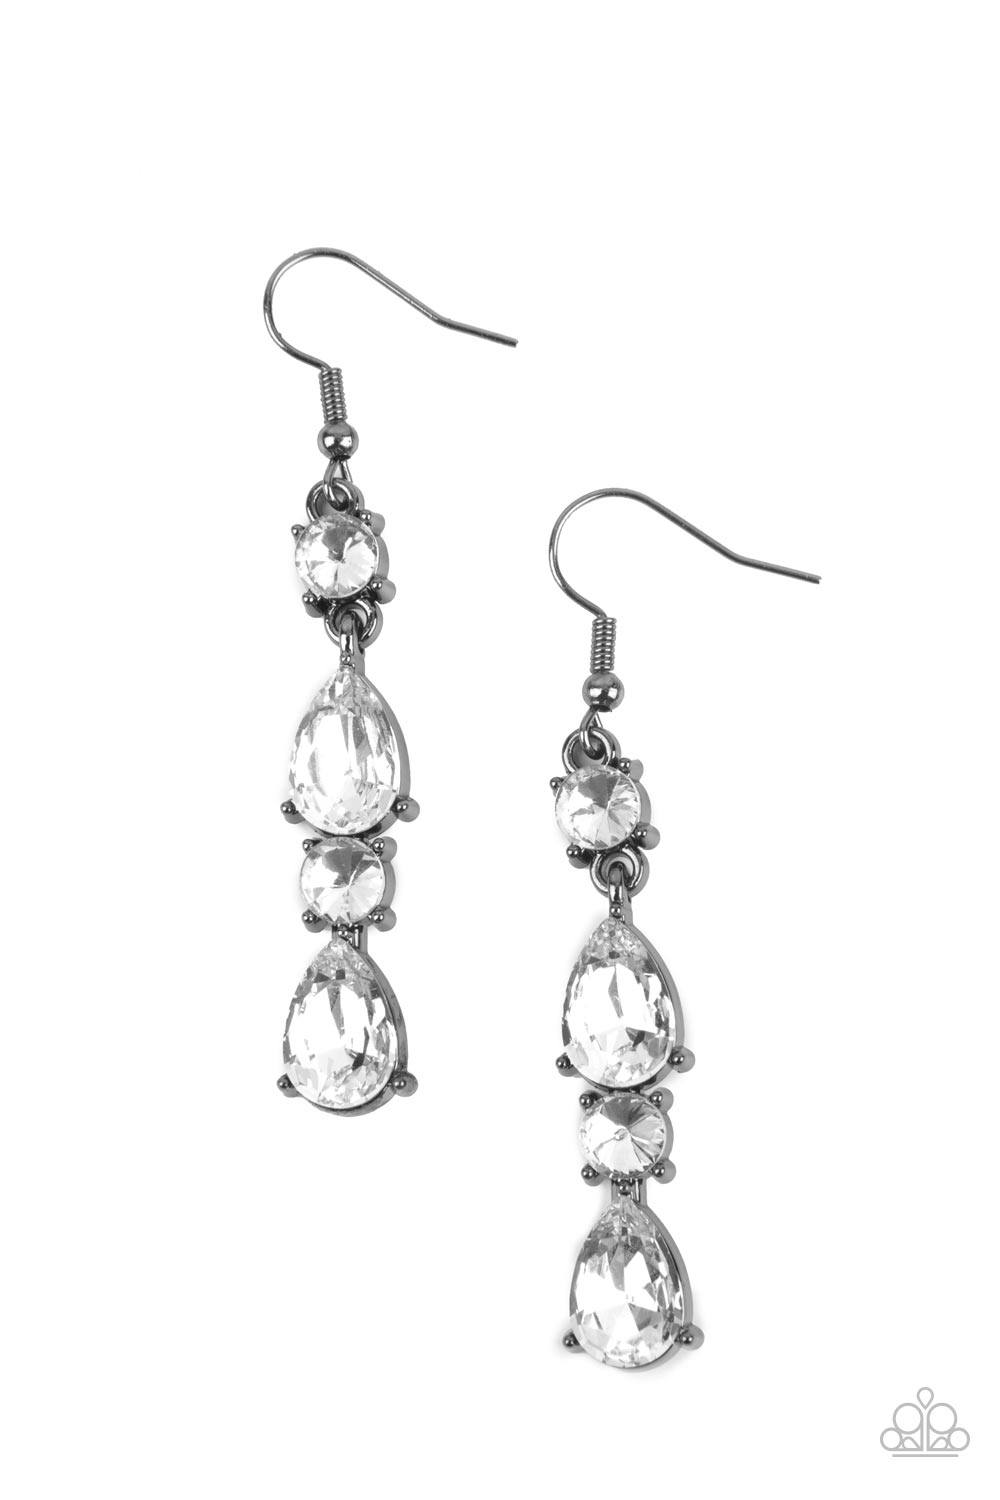 Raise Your Glass To Glamorous Earring (Black, Silver)